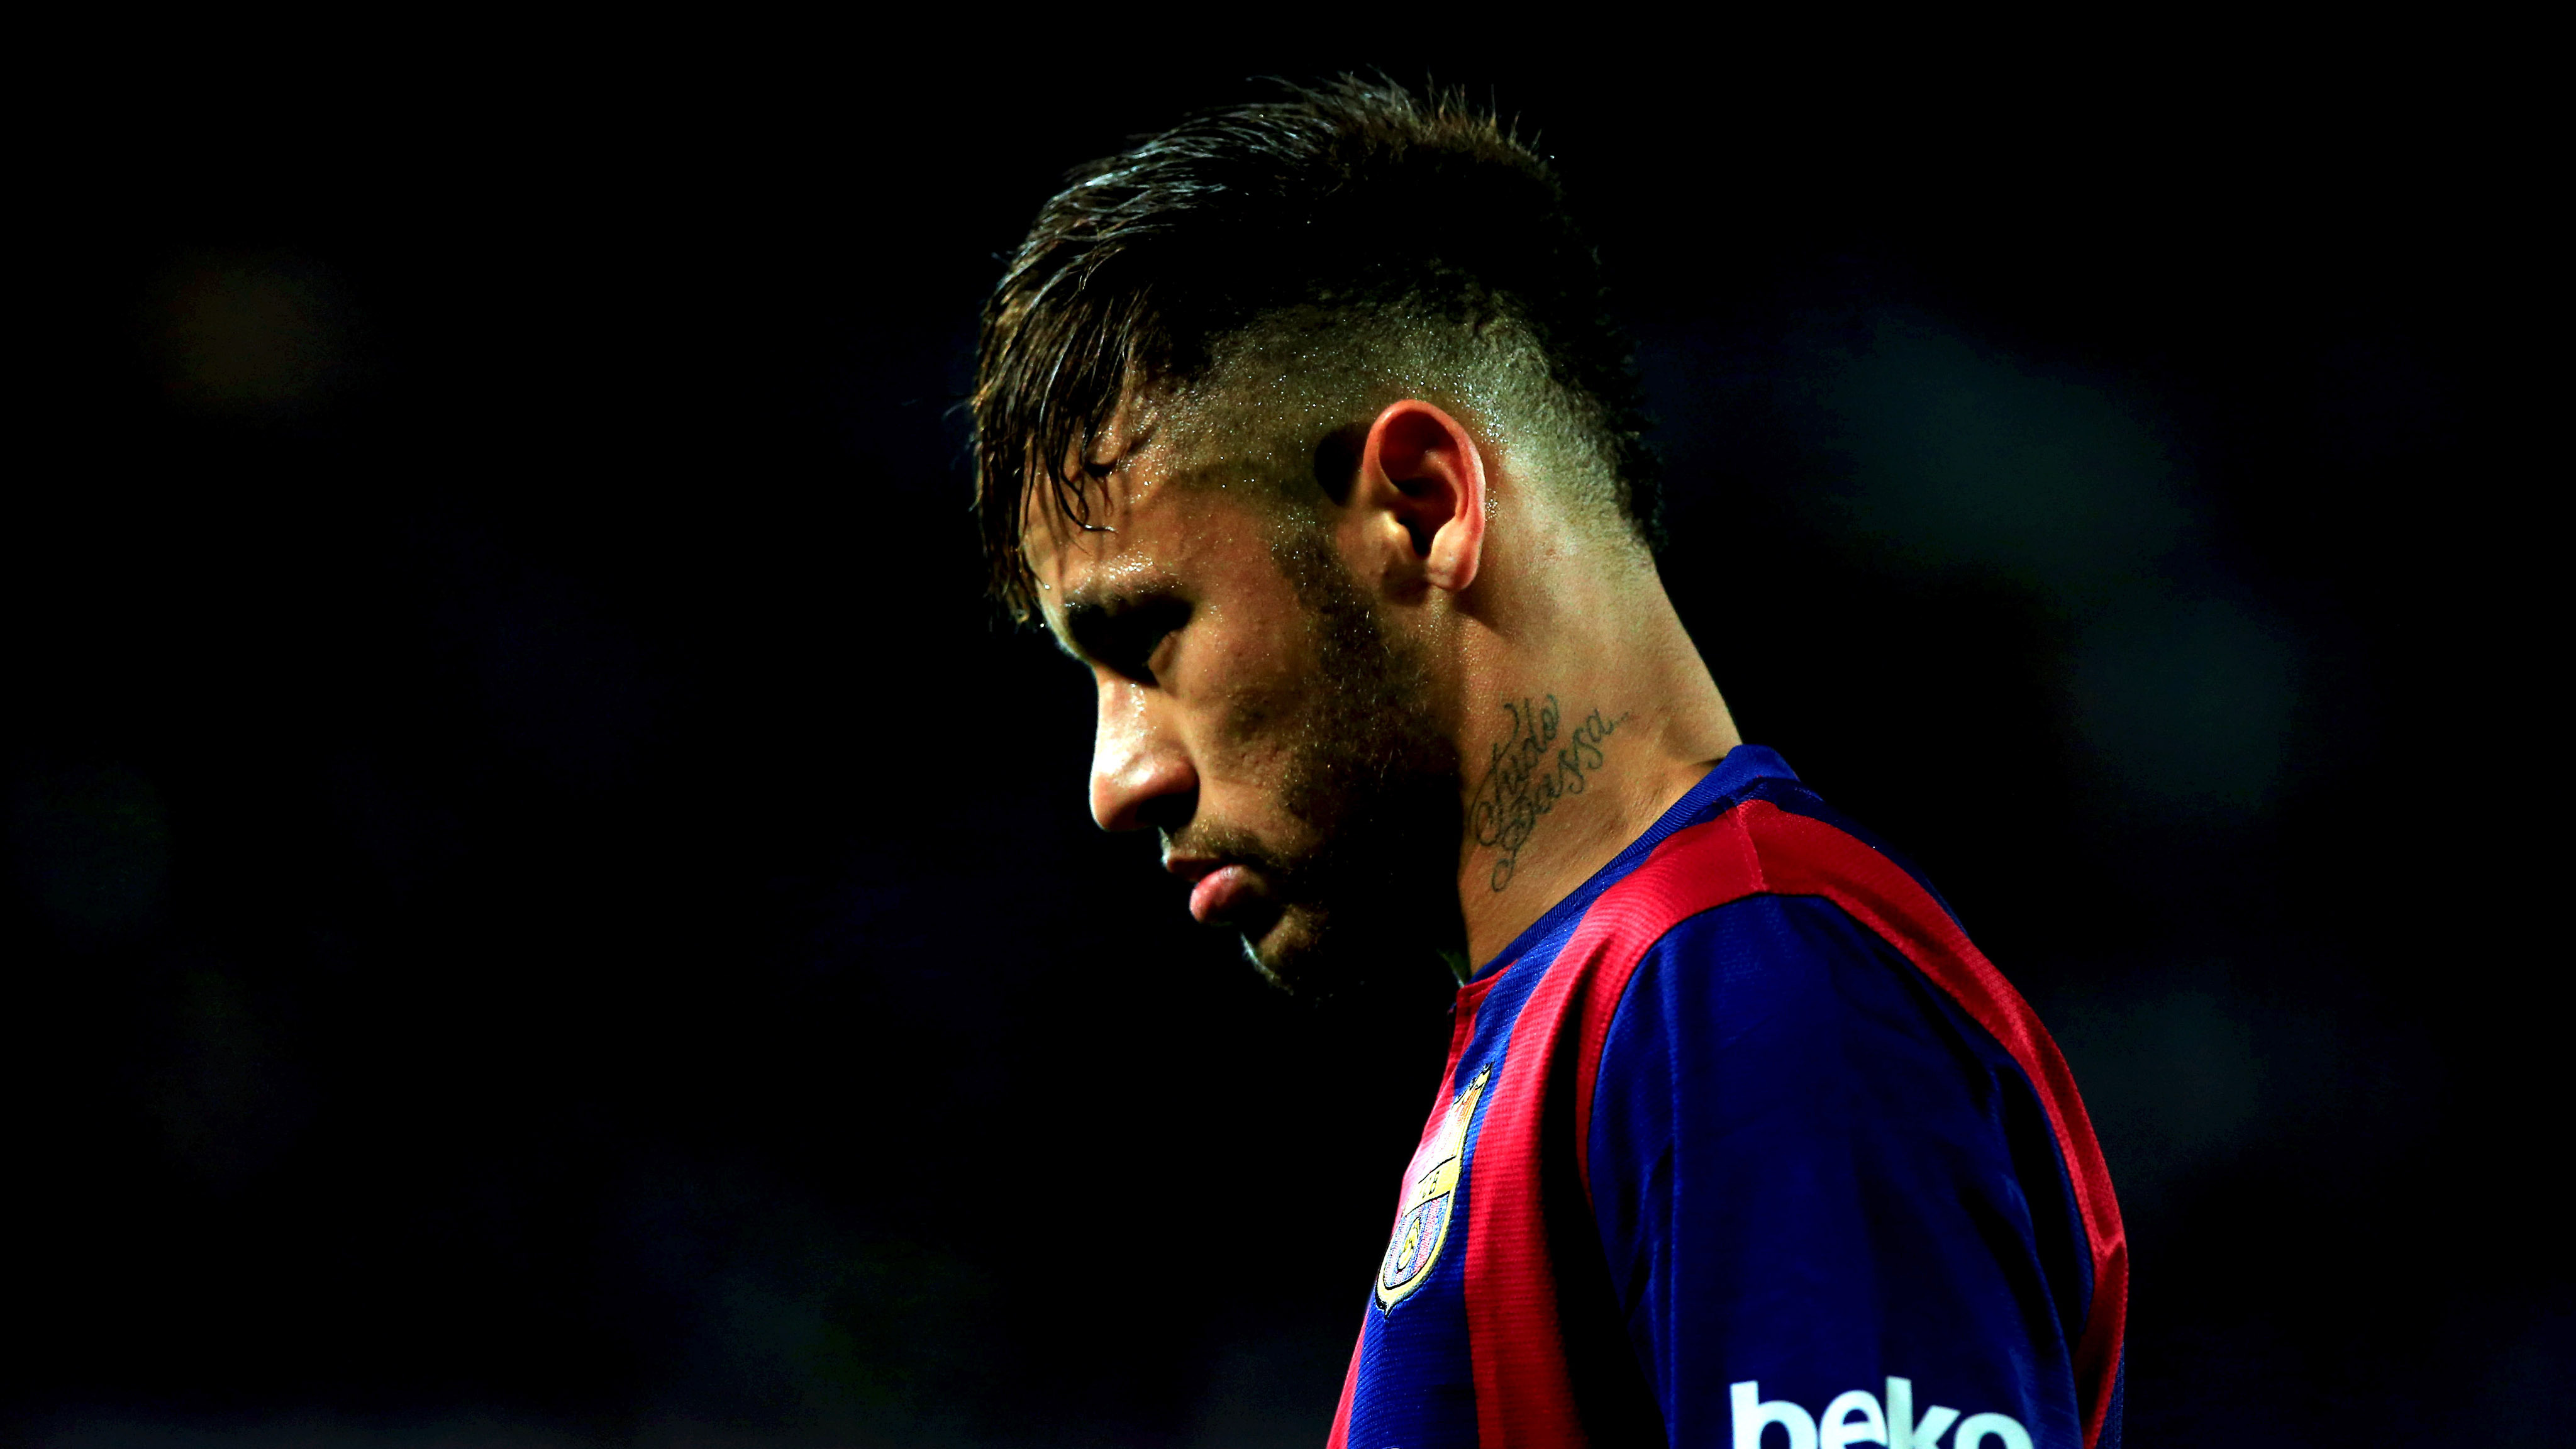 Neymar Wallpapers Images Photos Pictures Backgrounds